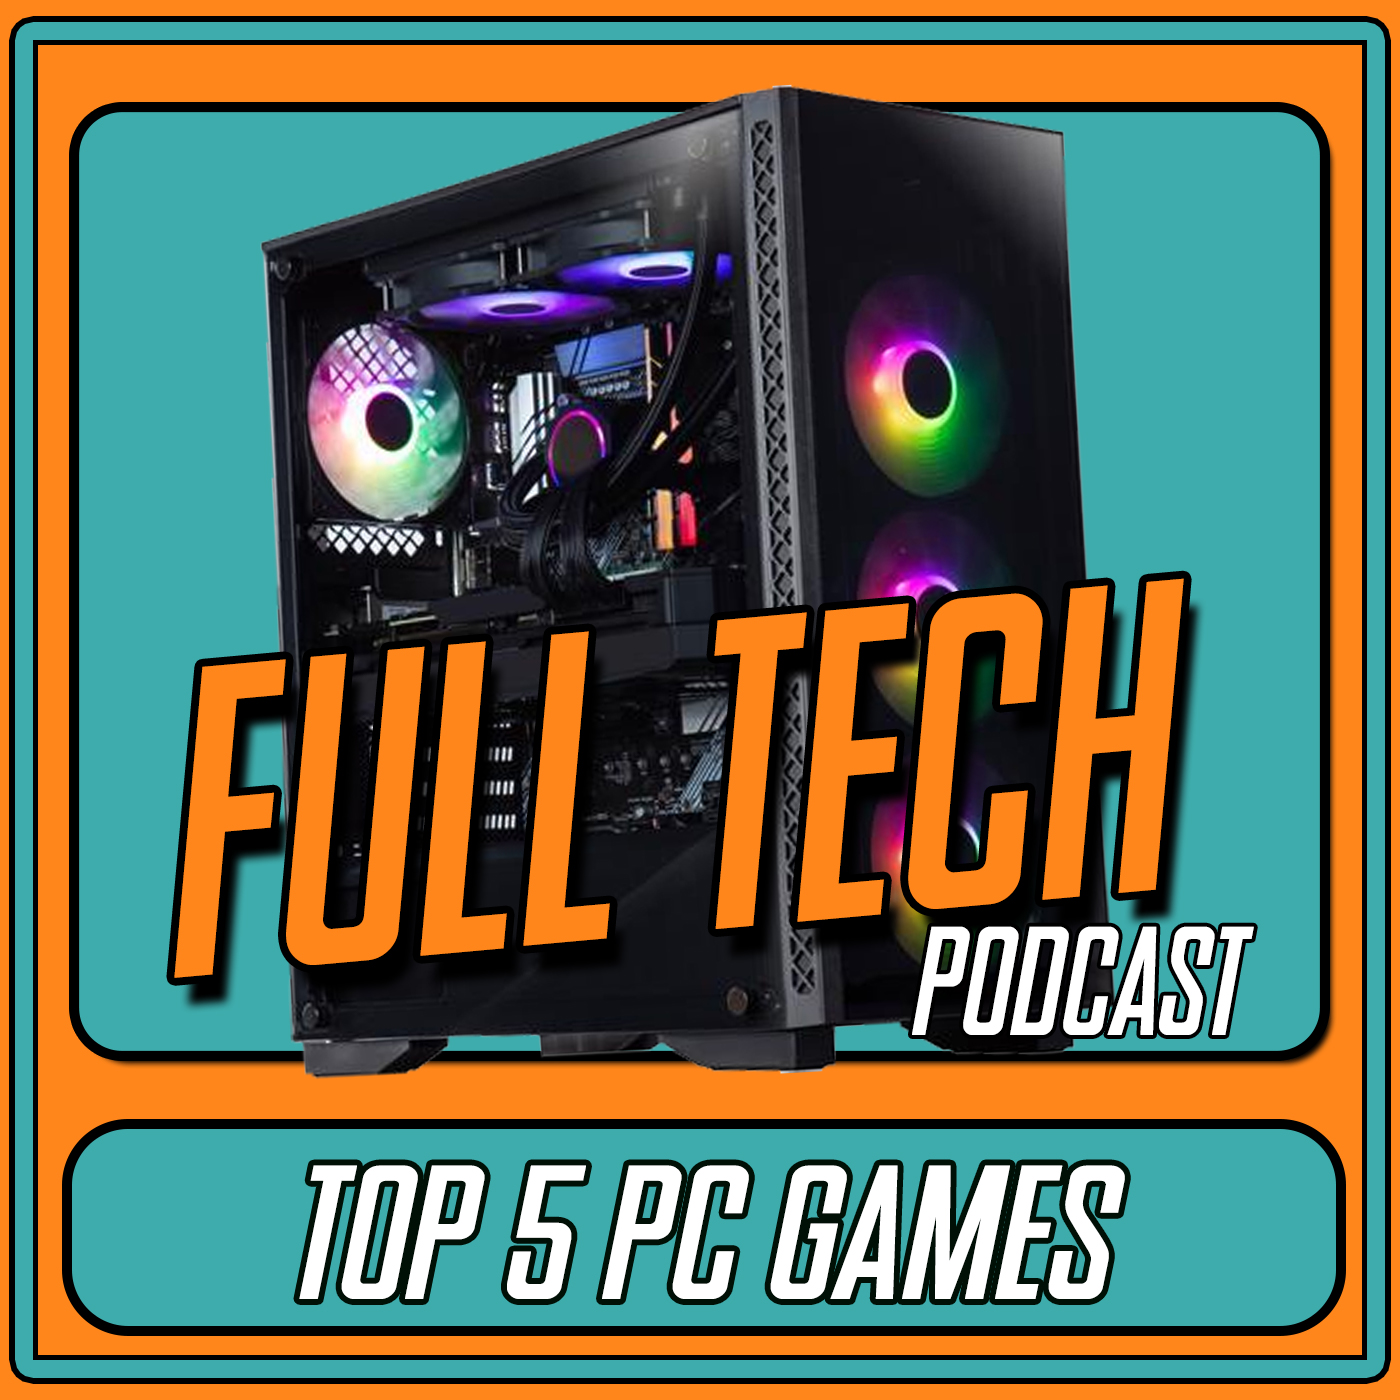 Top 5 PC Games